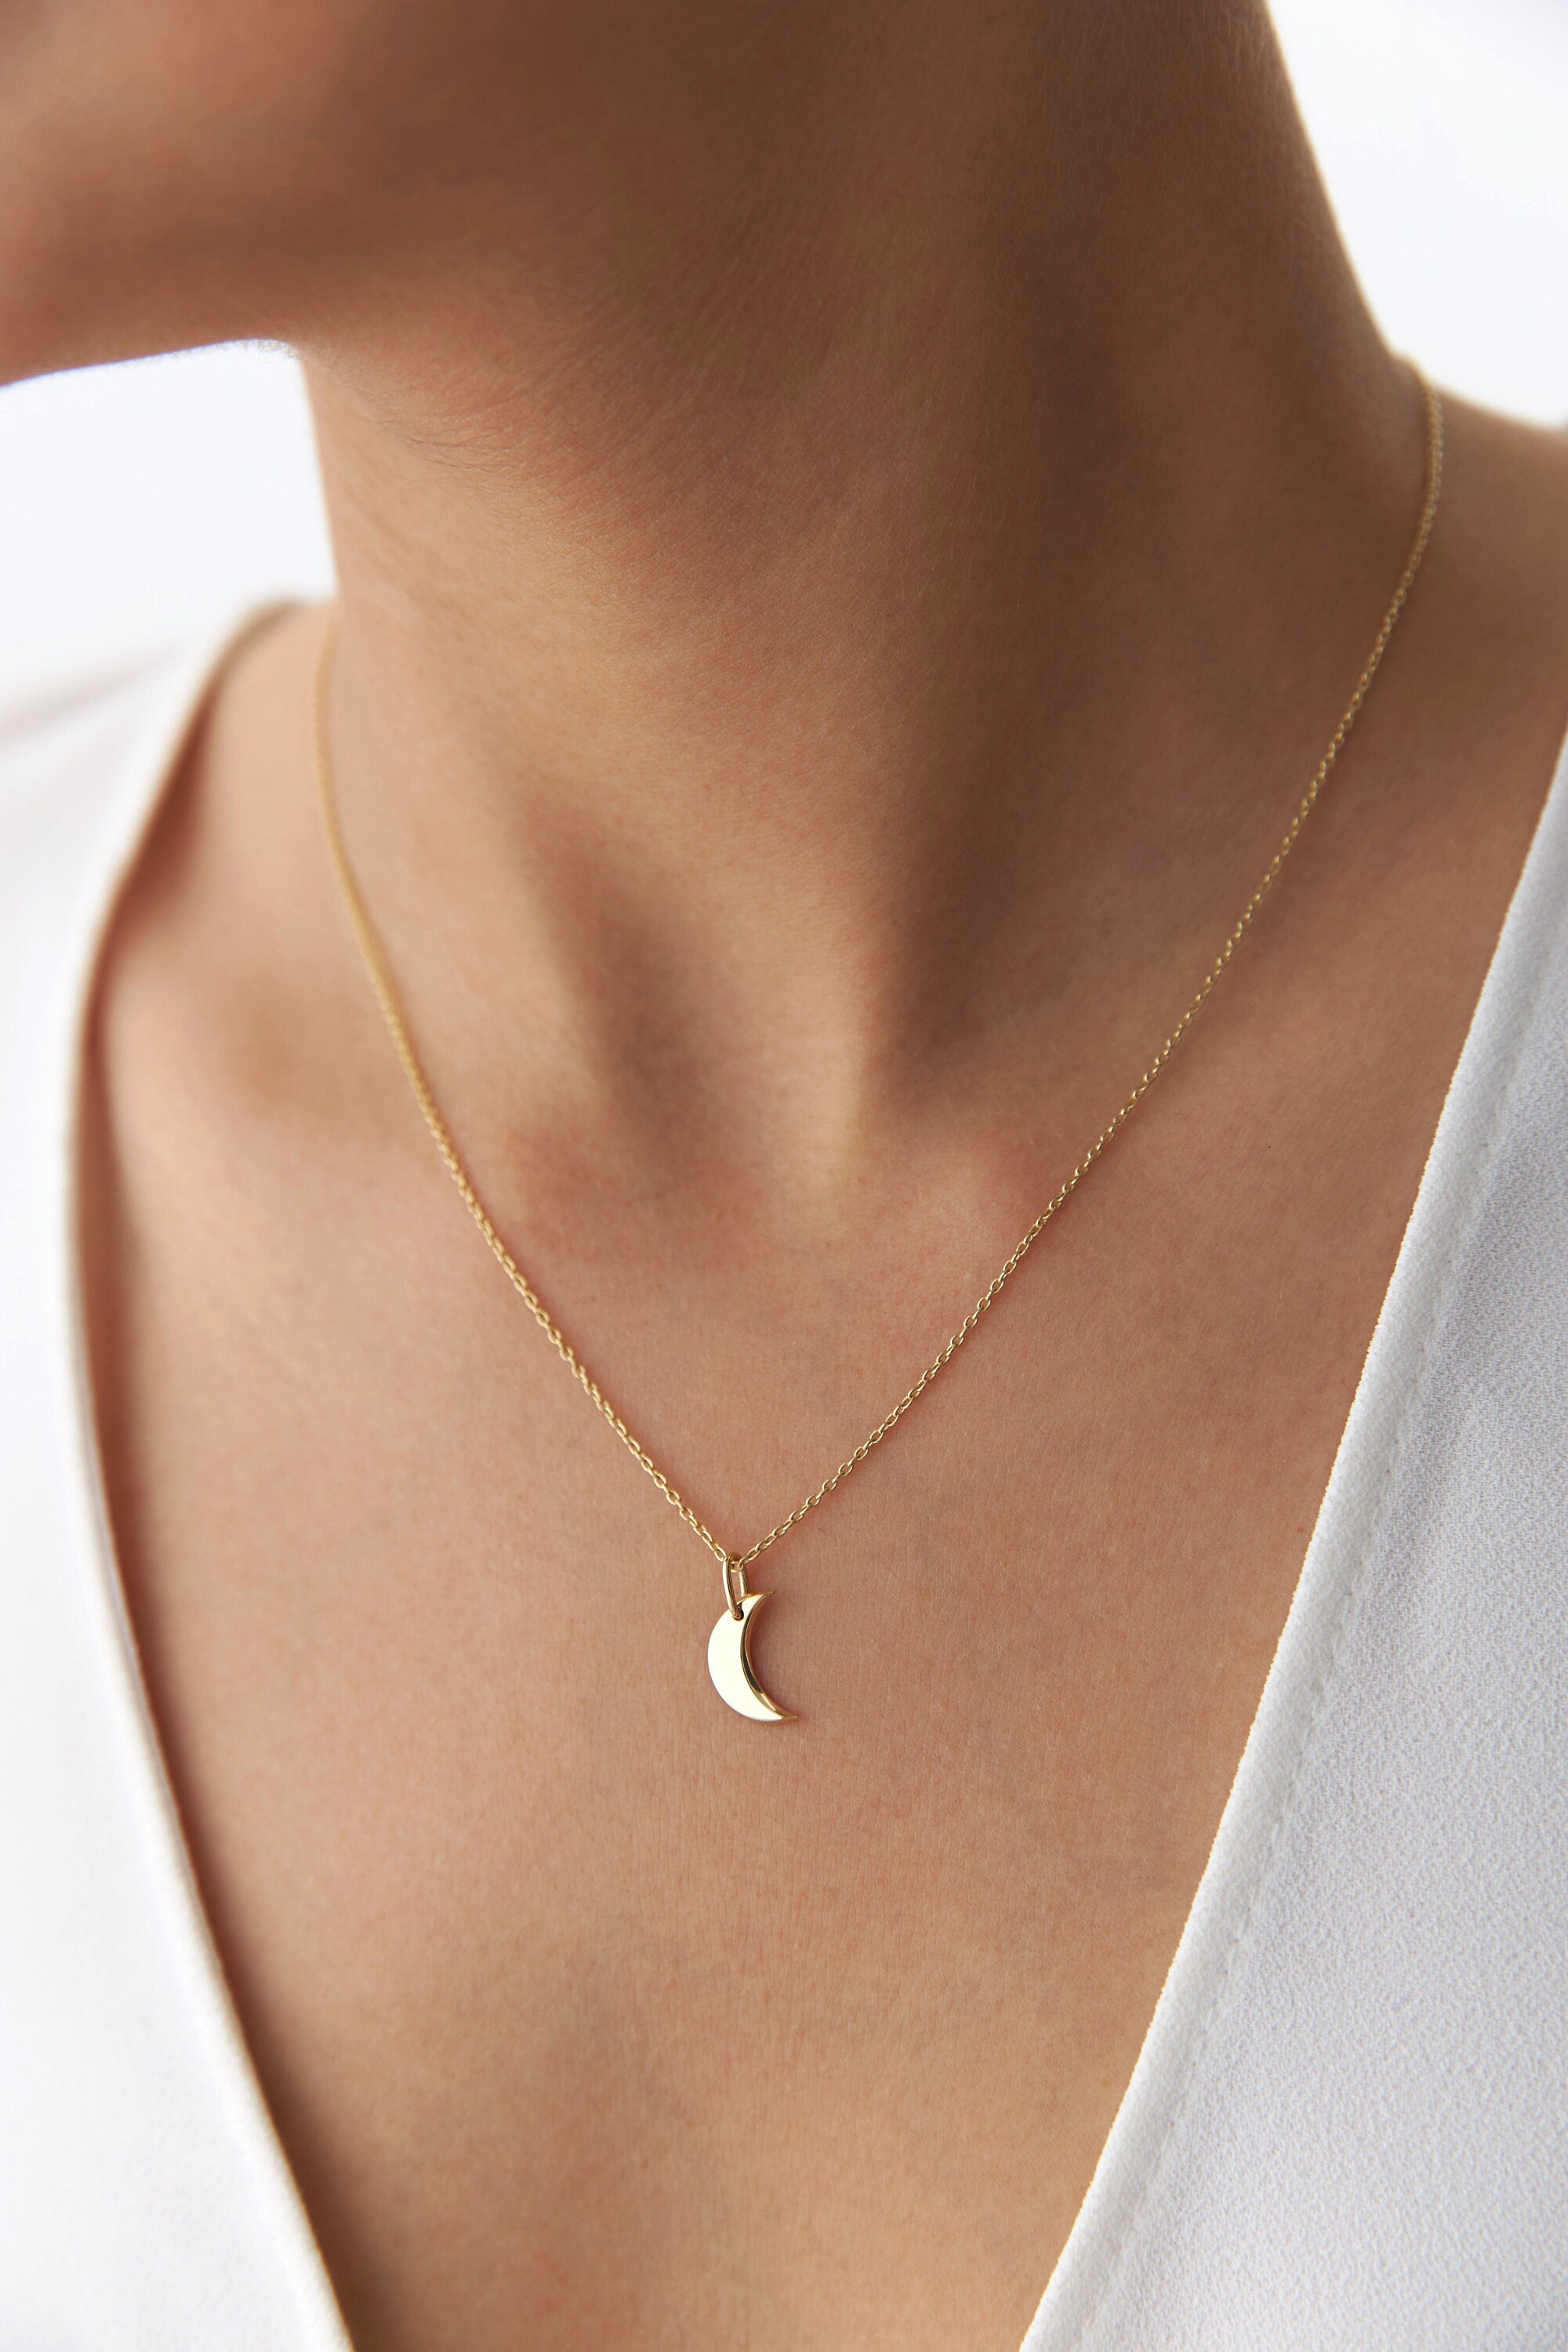 Crescent Moon Pendant Necklace Available in 14K and 18K Gold